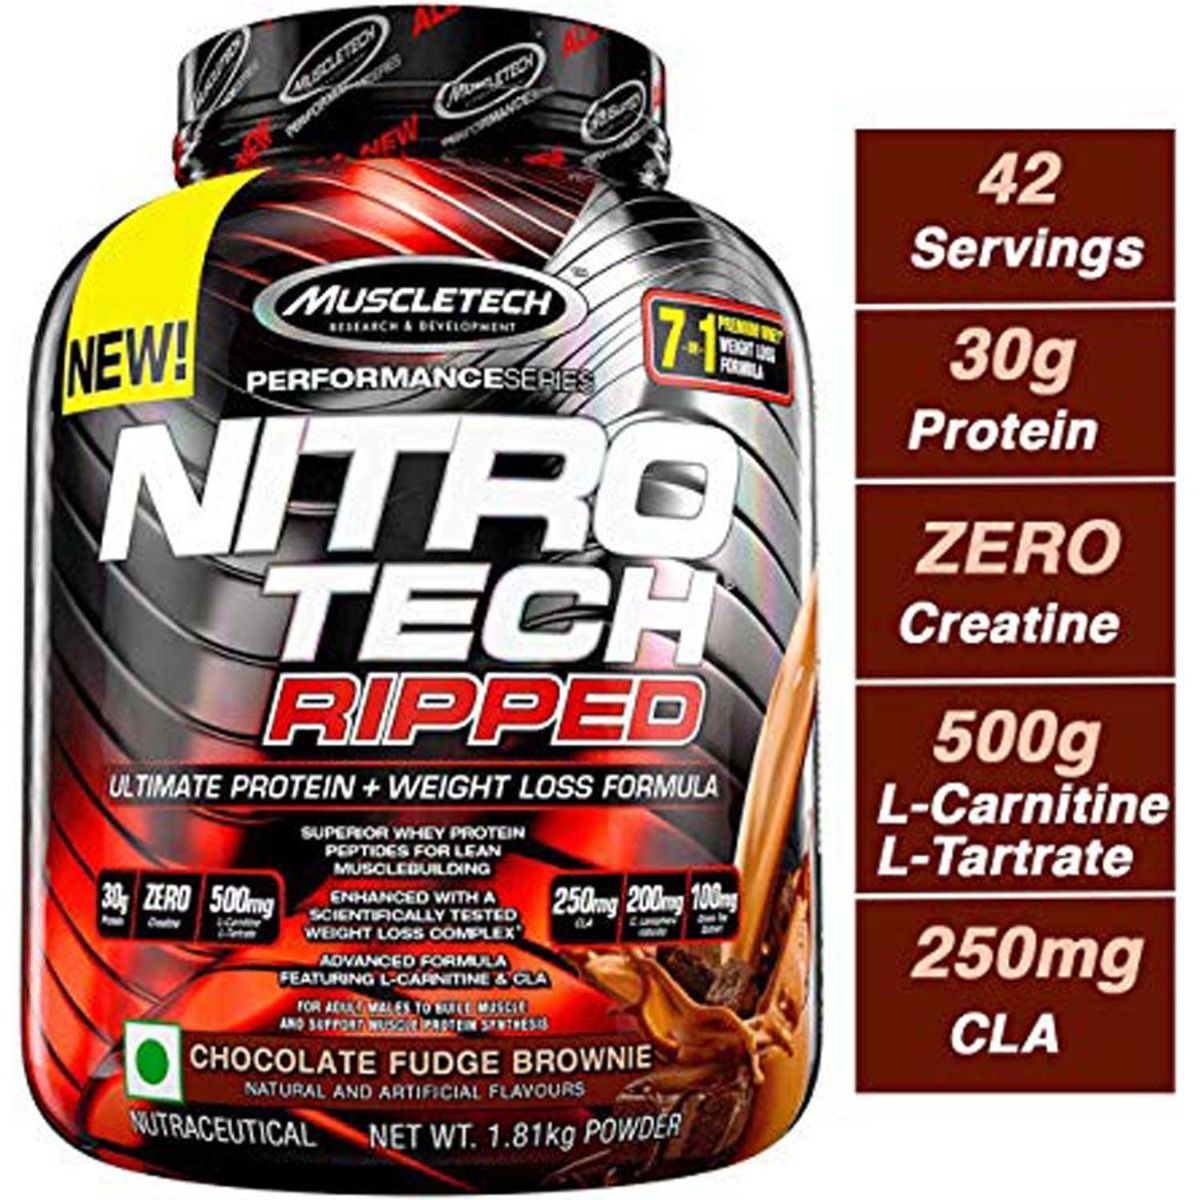 Buy Muscletech Nitrotech Performance Series Ripped Ultimate Protein + Weight Loss Formula Chocolate Fudge Brownie, 4 lb Online